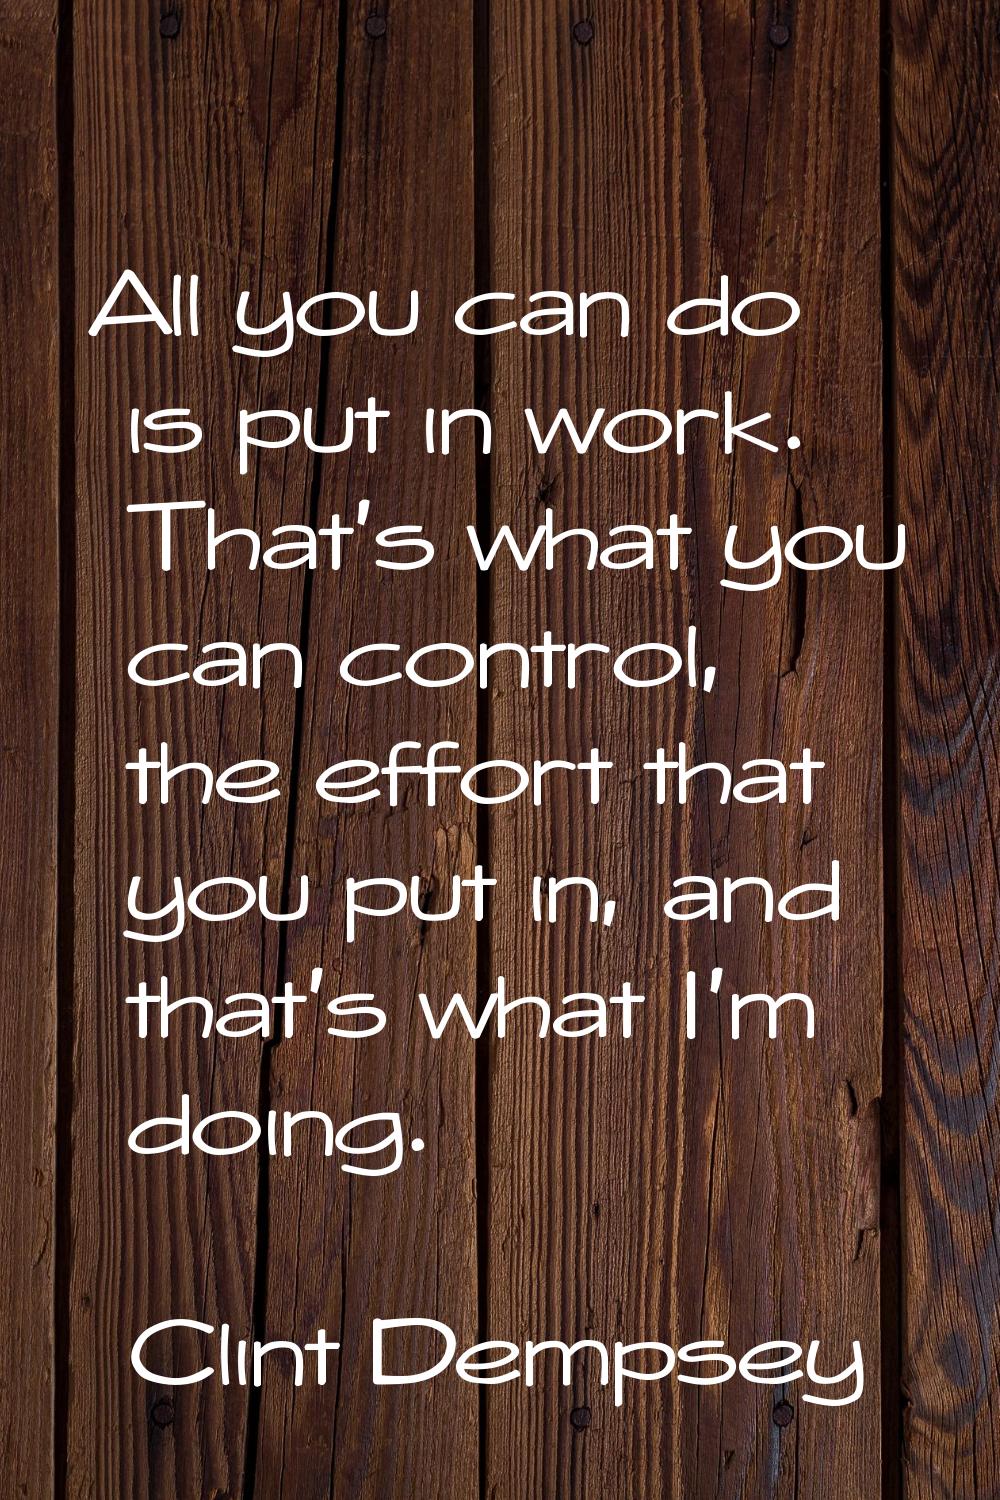 All you can do is put in work. That's what you can control, the effort that you put in, and that's 